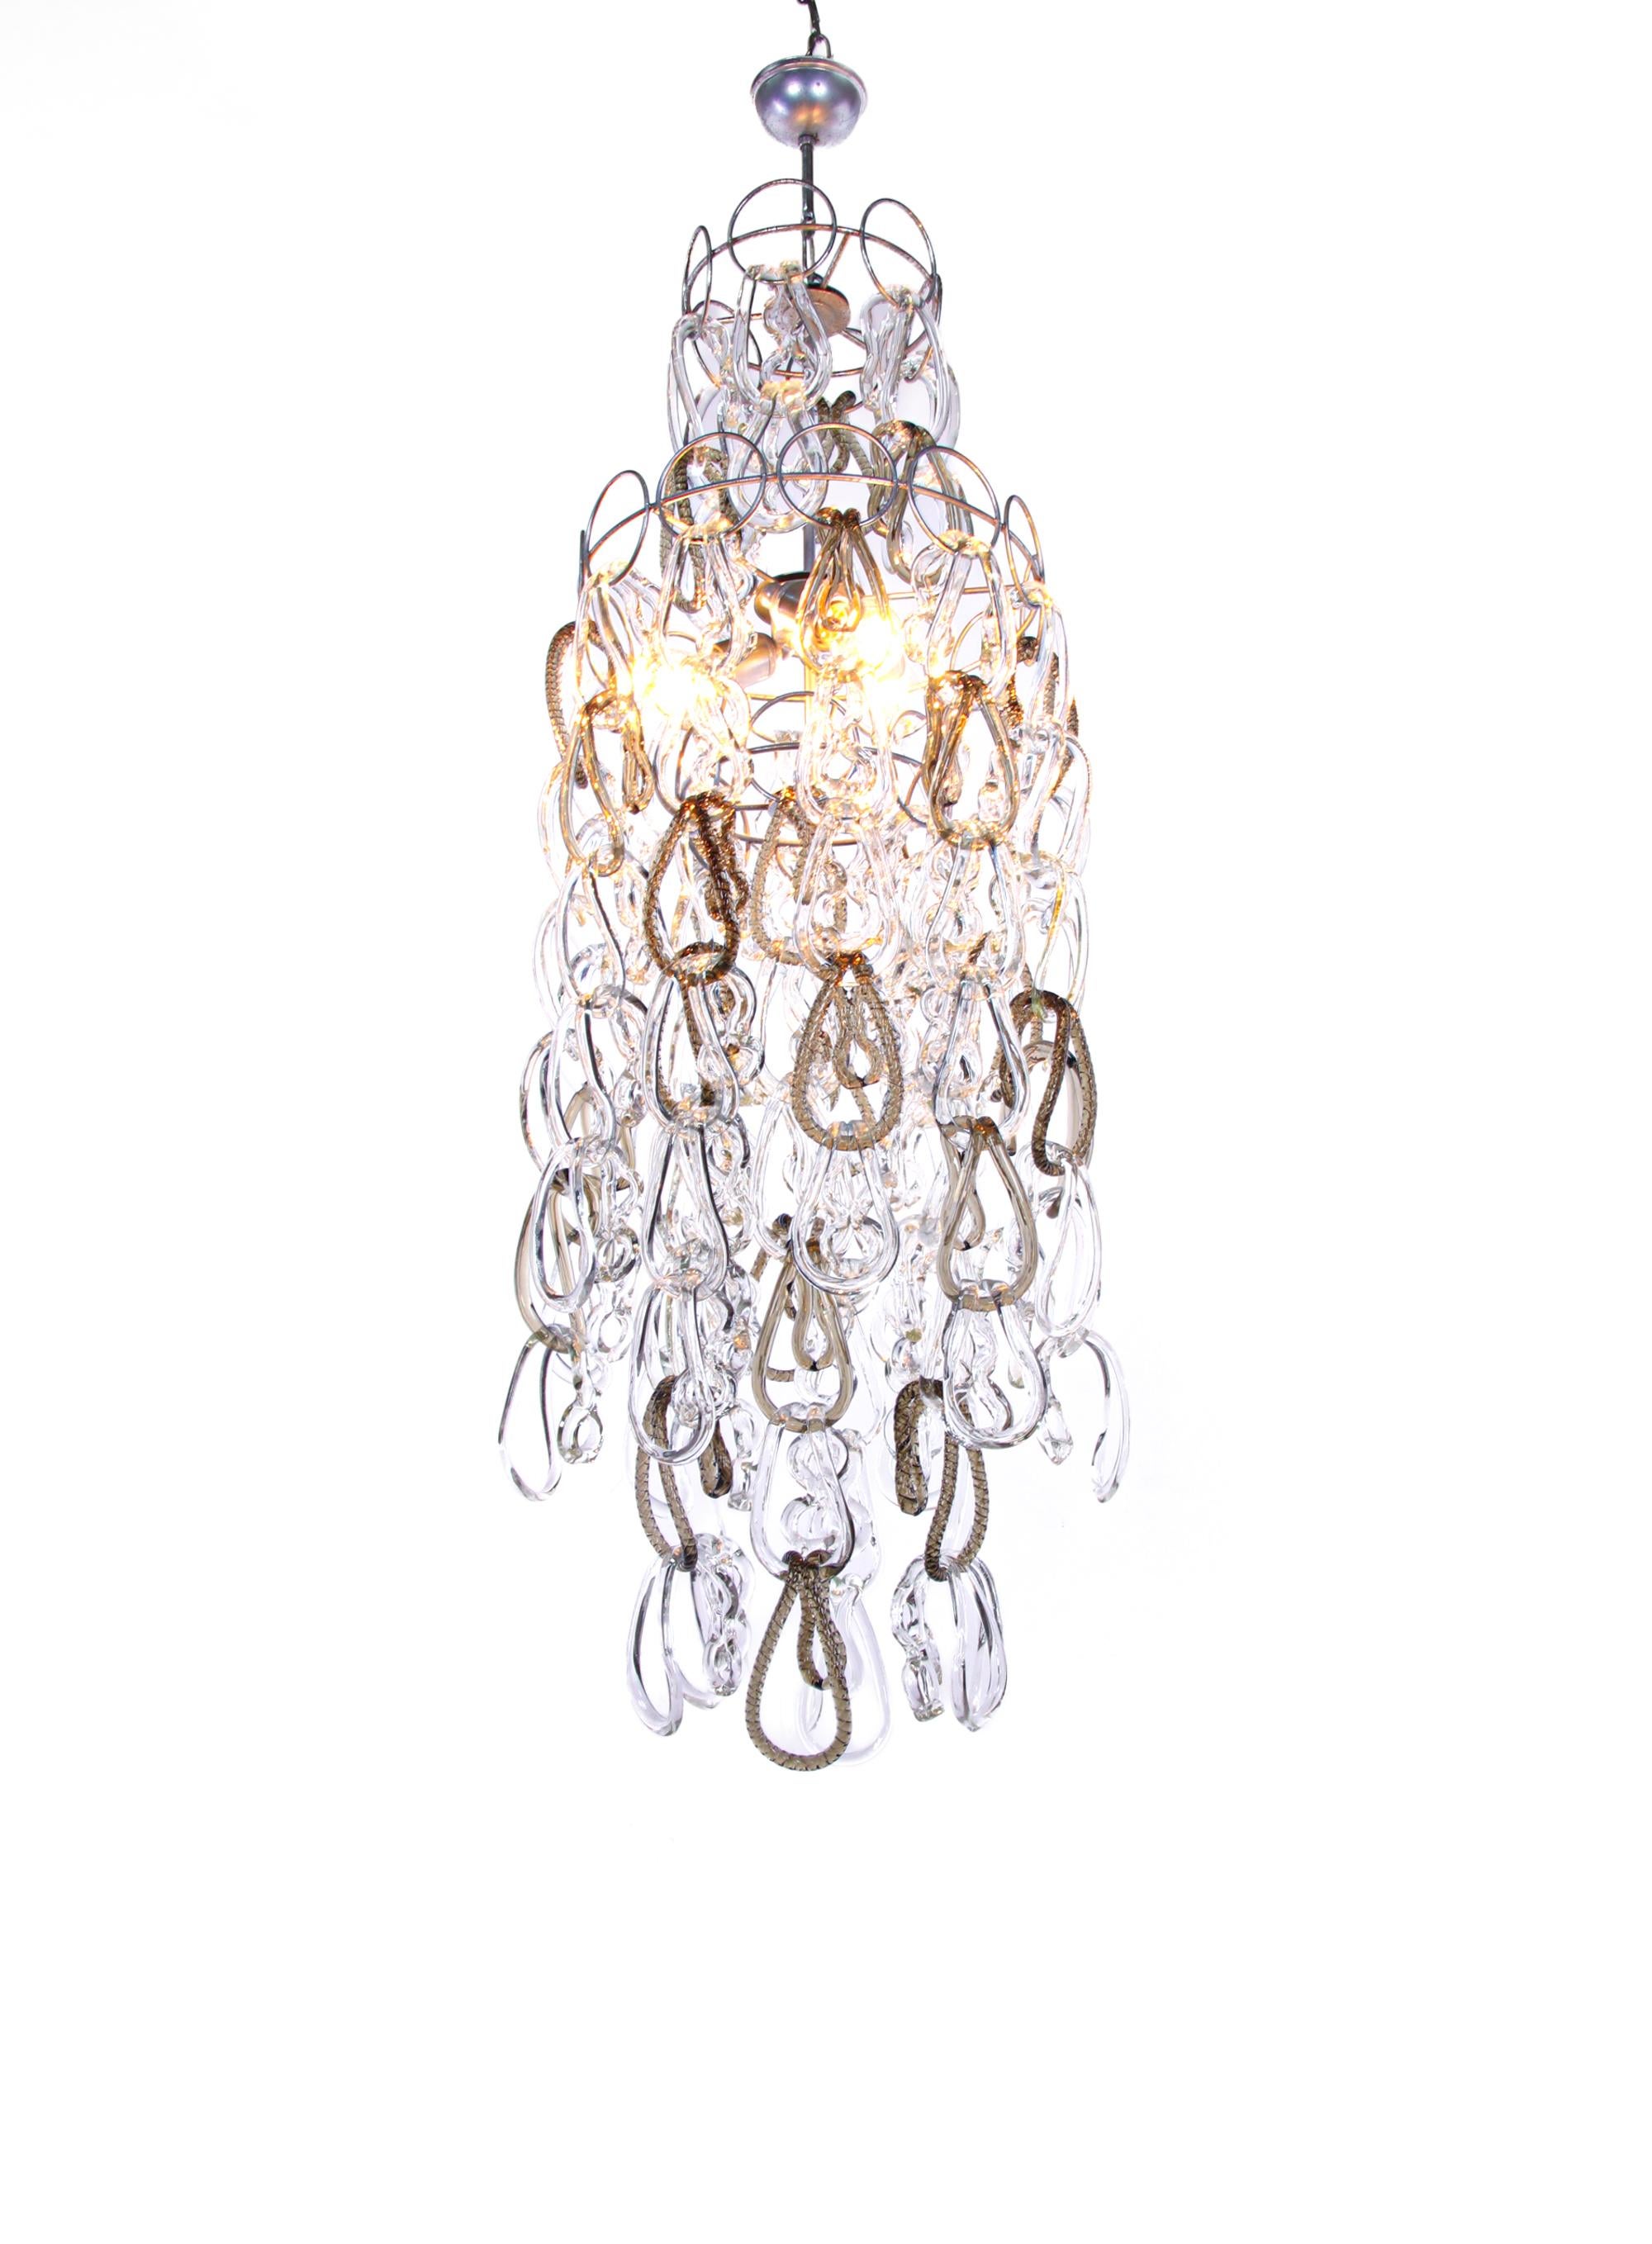 Imposing cascading Giogali waterfall chandelier with numerous interlaced clear and amber Murano glasses on a metal frame. The 90 clear and 25 amber Murano glasses can be individually arranged, so that the chandelier can be adapted to different